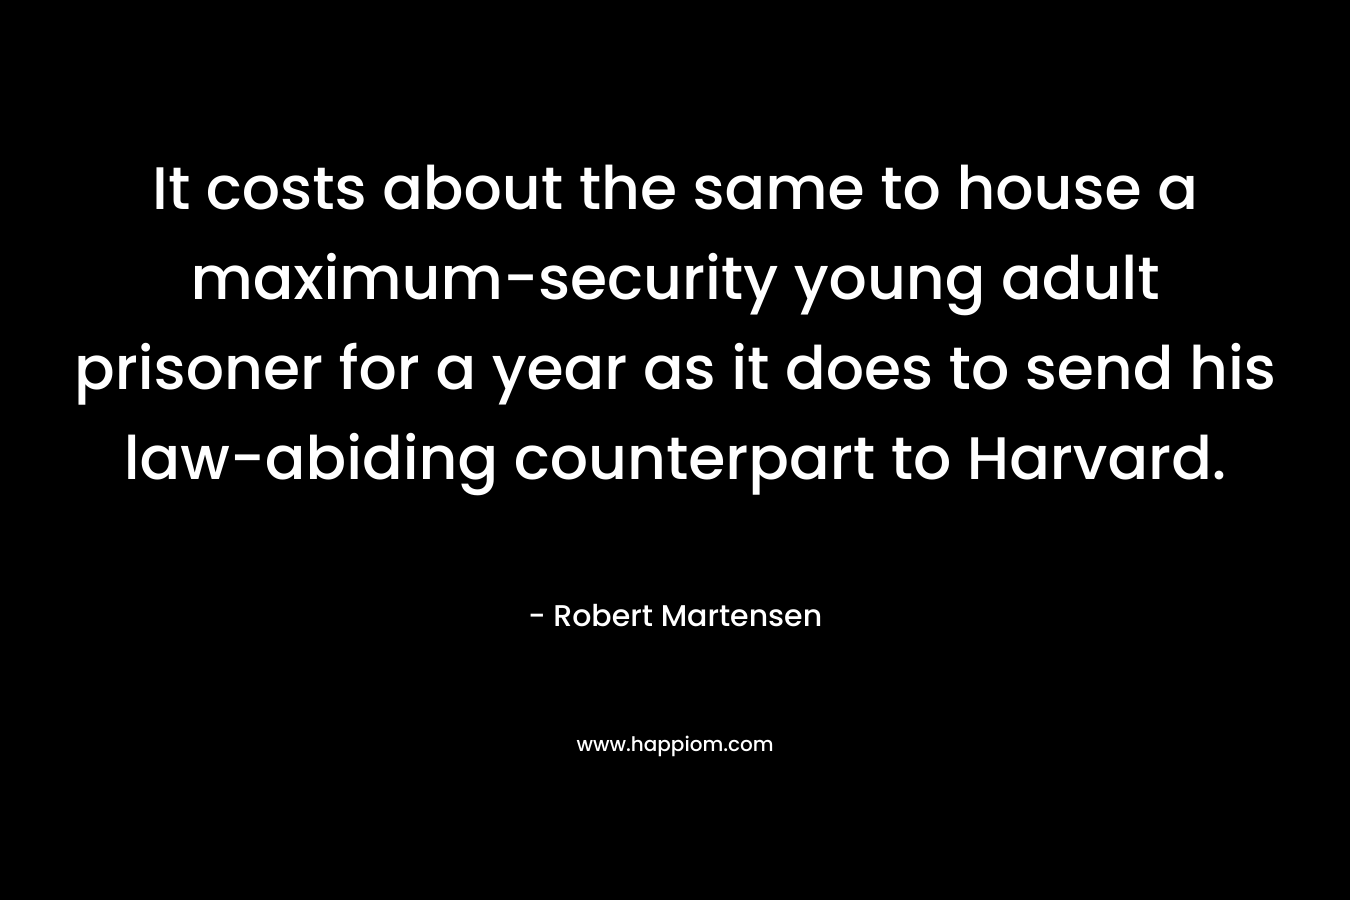 It costs about the same to house a maximum-security young adult prisoner for a year as it does to send his law-abiding counterpart to Harvard. – Robert Martensen